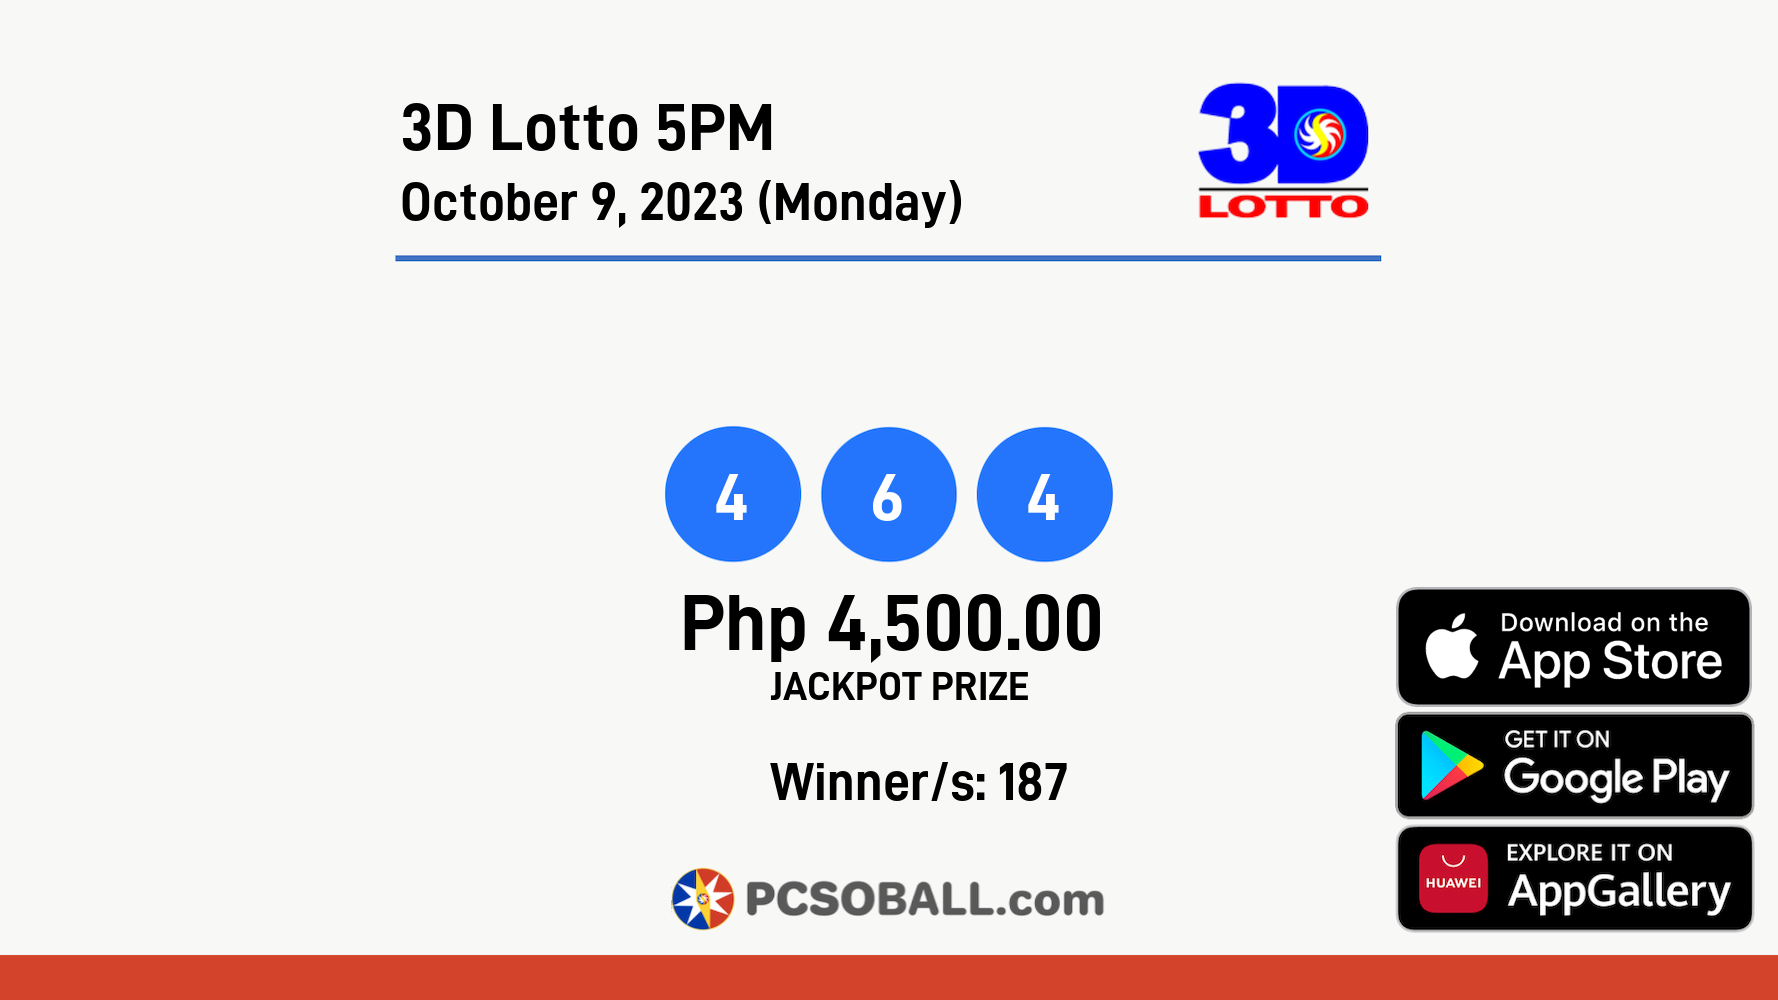 3D Lotto 5PM October 9, 2023 (Monday) Result